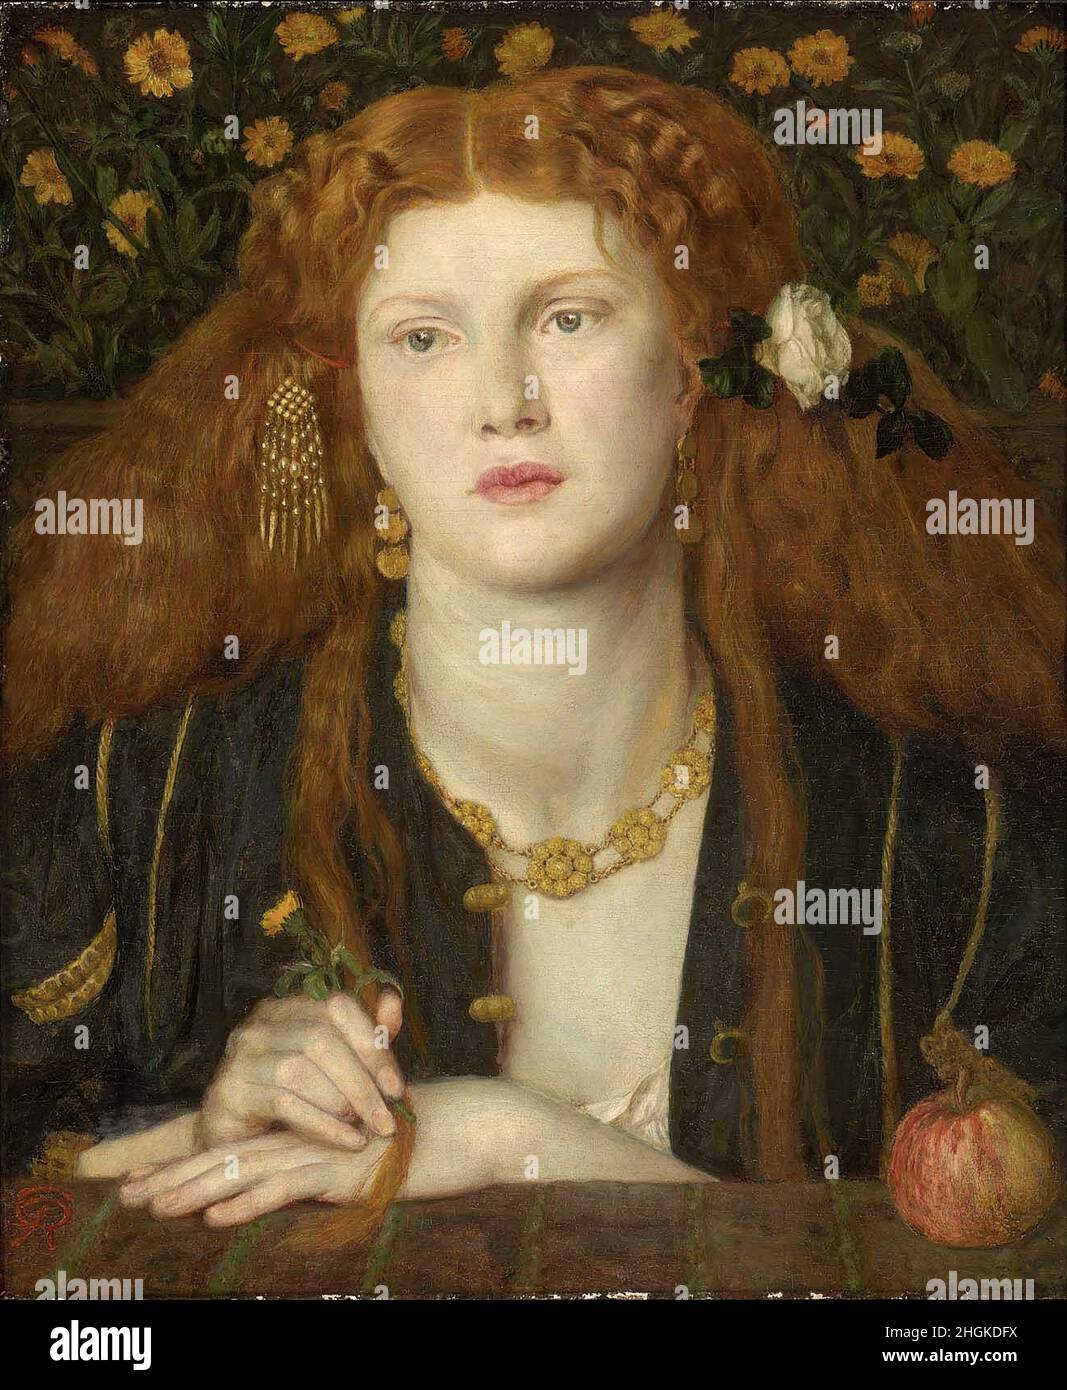 Bocca Baciata - Lips That Have Been Kissed - 1859 - oil on wood 32,1 x 27 cm - Rossetti Dante Gabriel Stock Photo